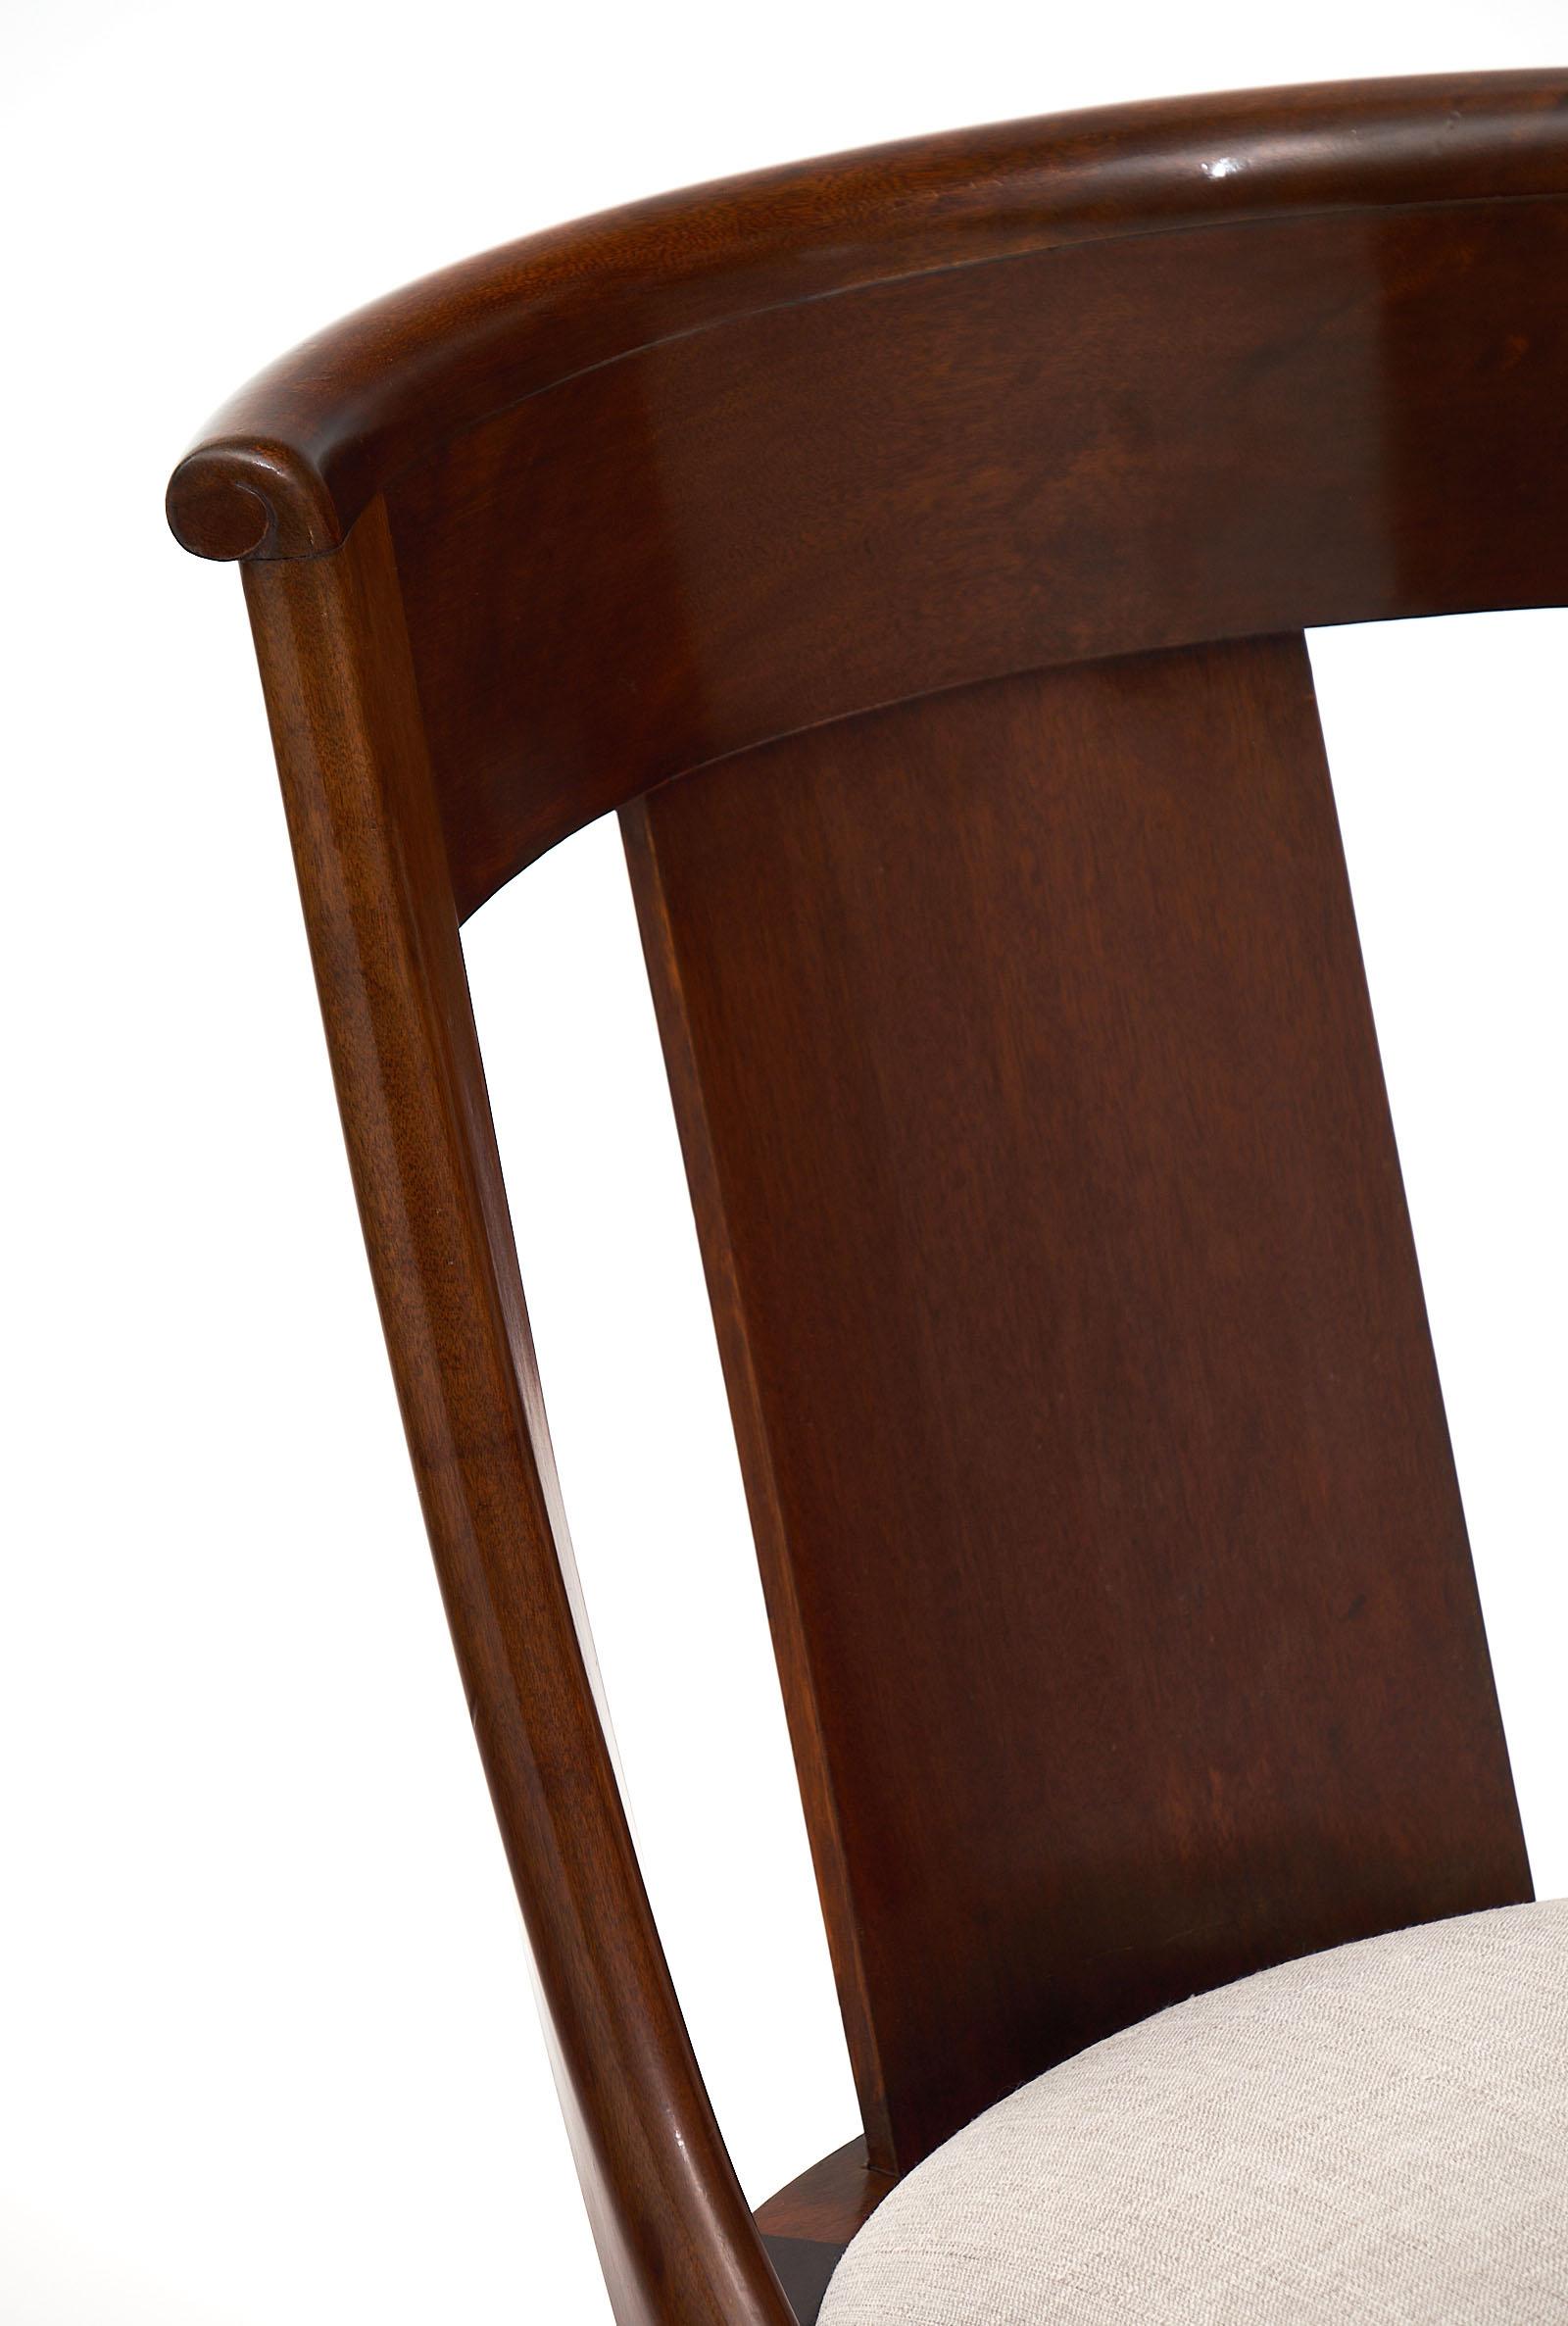 French Gondola Empire Style Dining Chairs